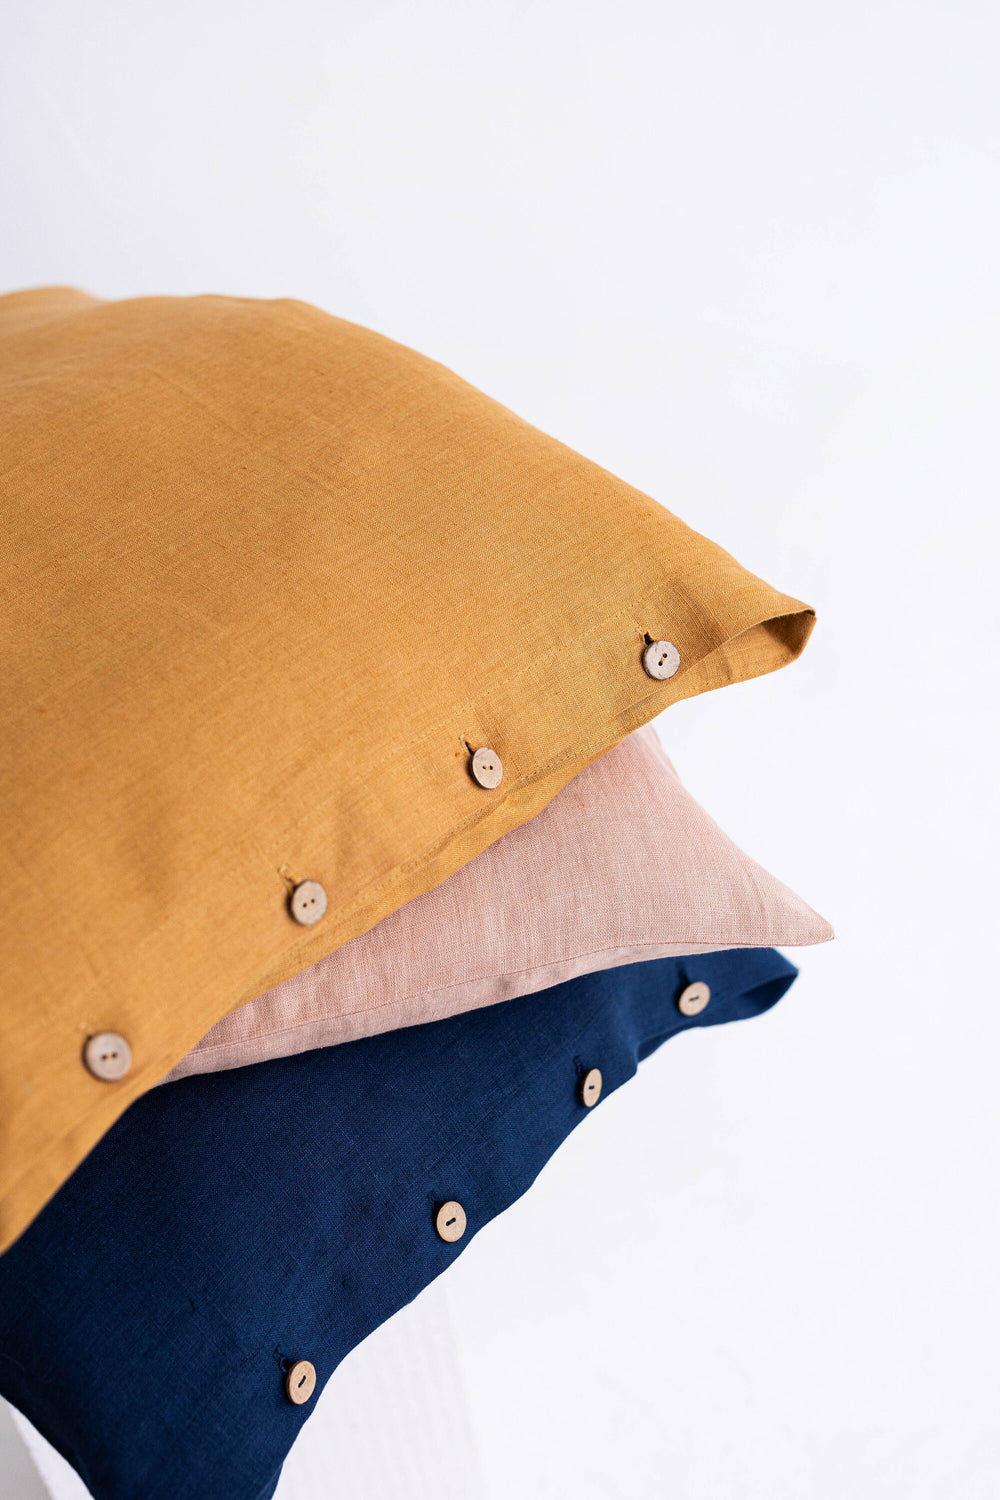 Linen Pillowcase With Buttons In Various Colors 1 | Daily Linen